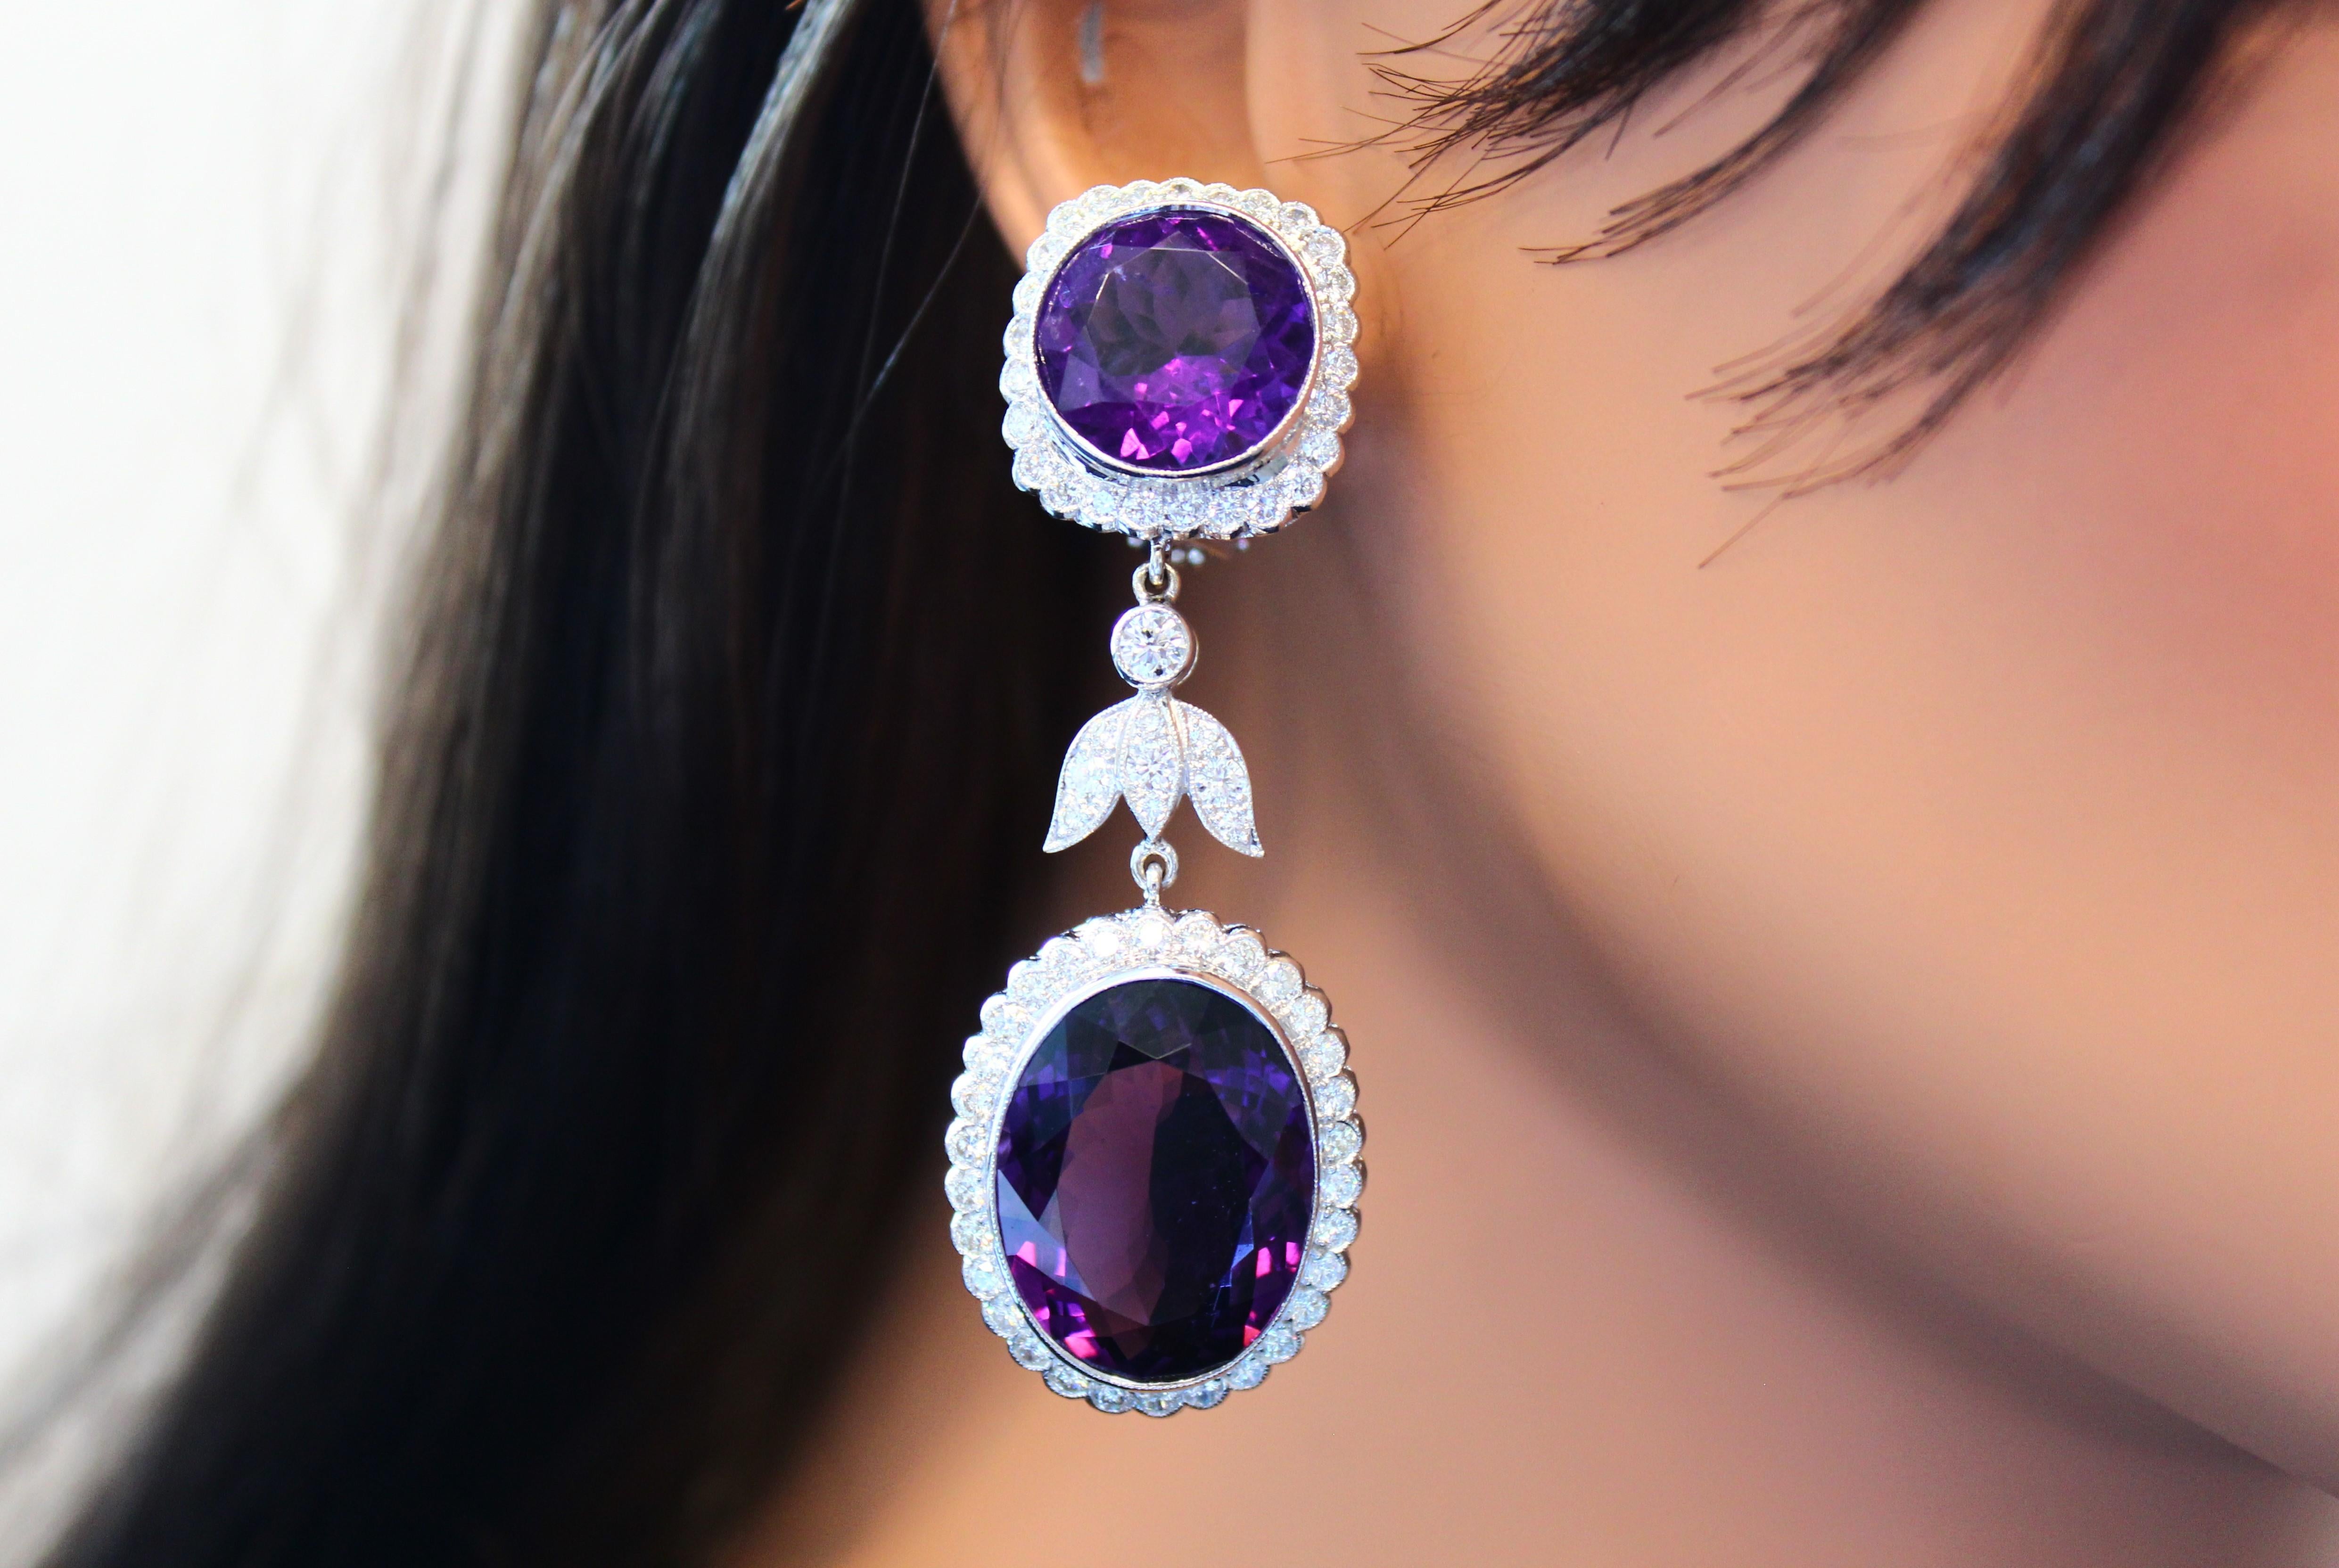 25 Carat Oval Shape Purple Amethyst Fashion Earrings In 18k White Gold In New Condition For Sale In Chicago, IL